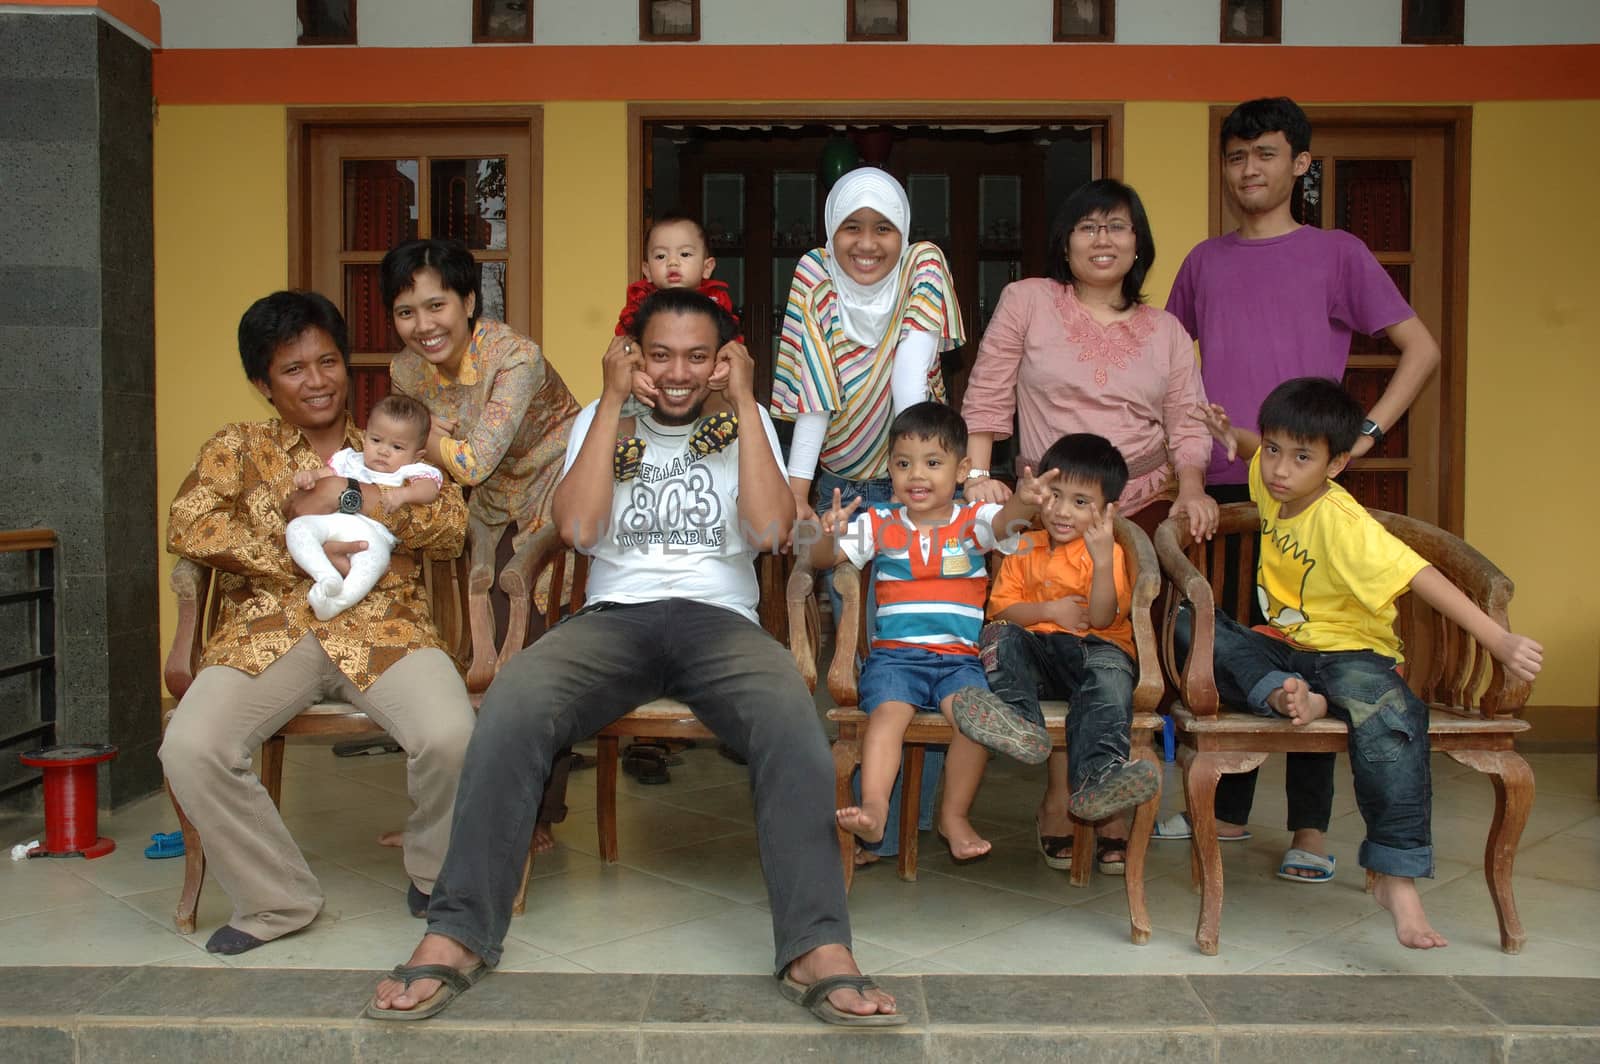 bandung, indonesia-december 19, 2010: large group of family gathering together in front of house.